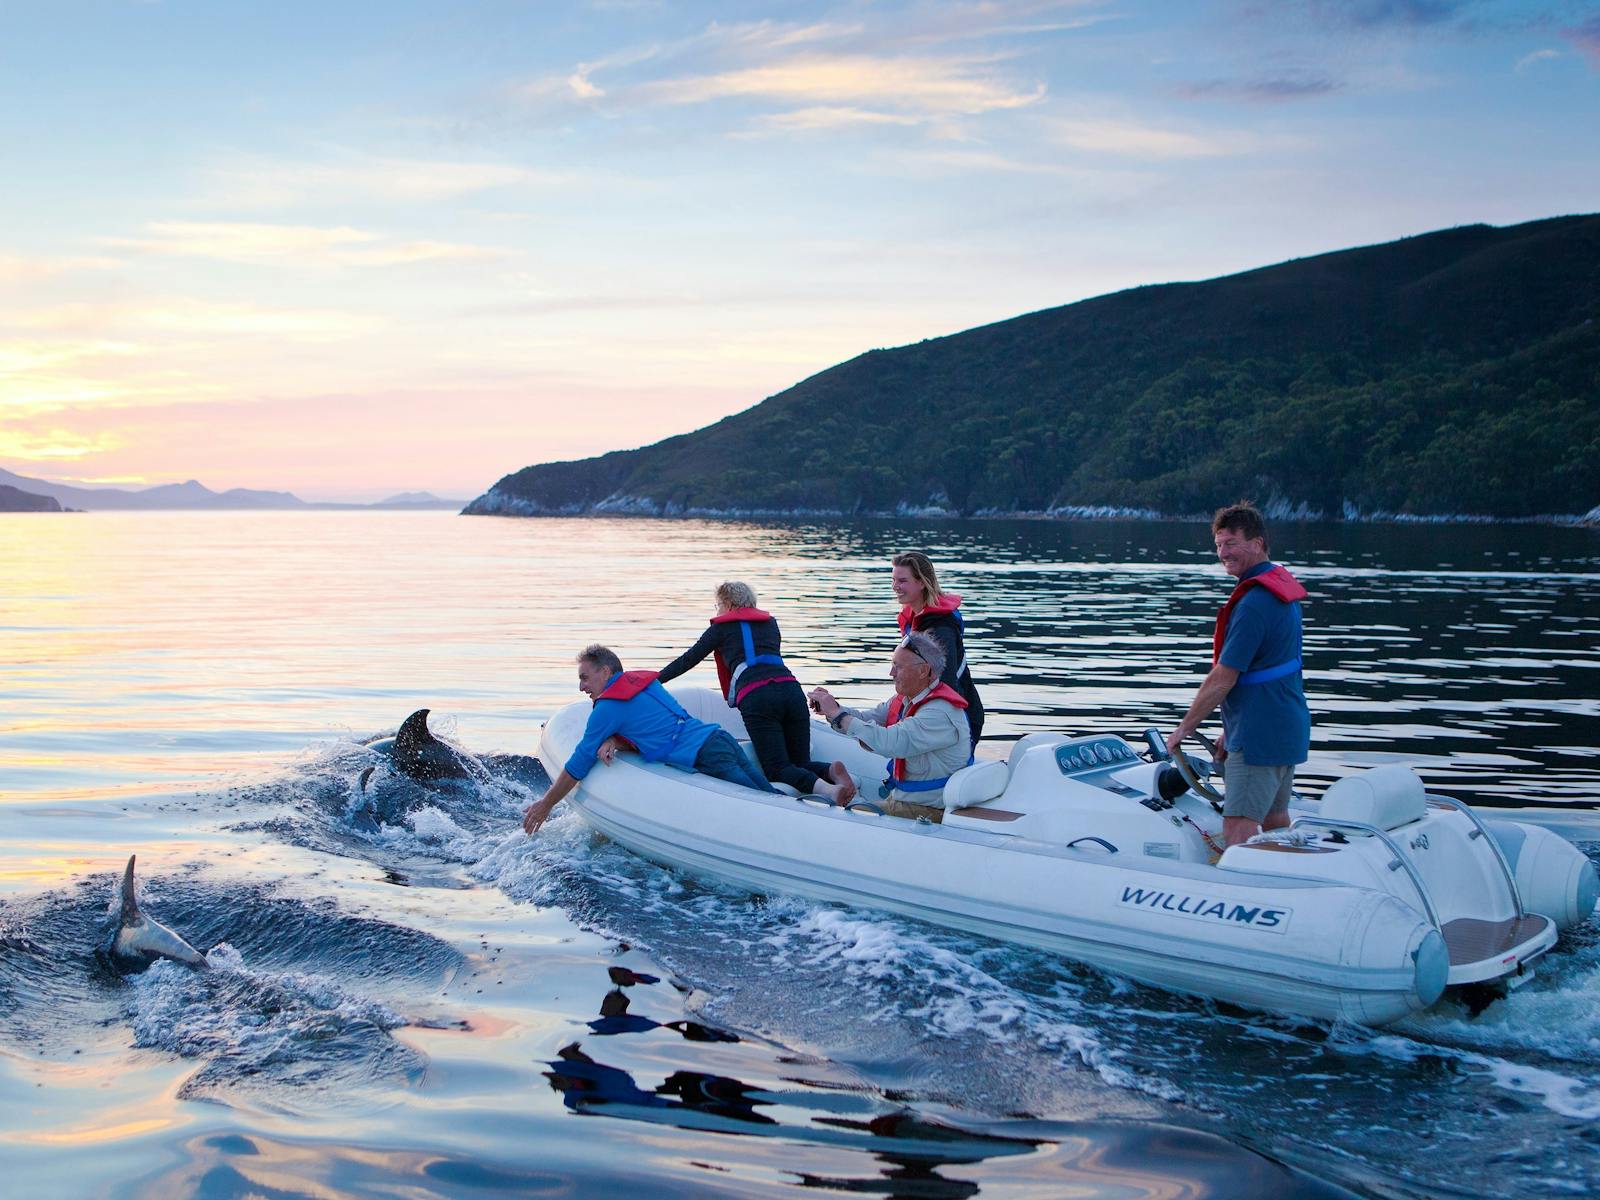 5 people in a small tender boat surrounded by dolphins at sunset